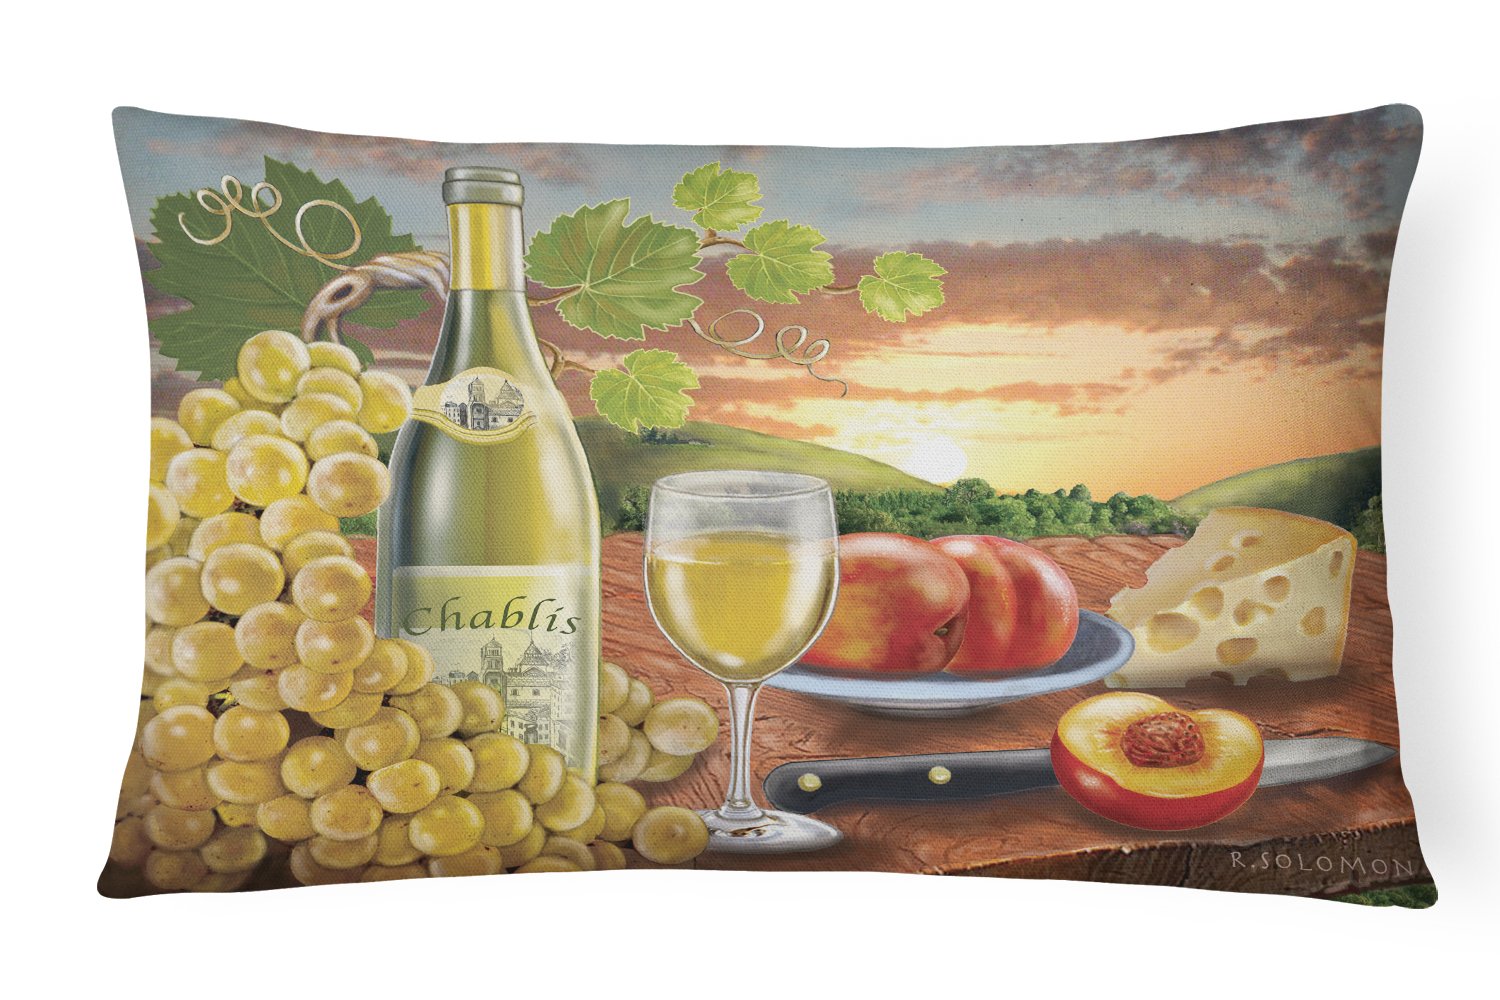 Chablis, Peach, Wine and Cheese Canvas Fabric Decorative Pillow PRS4028PW1216 by Caroline's Treasures